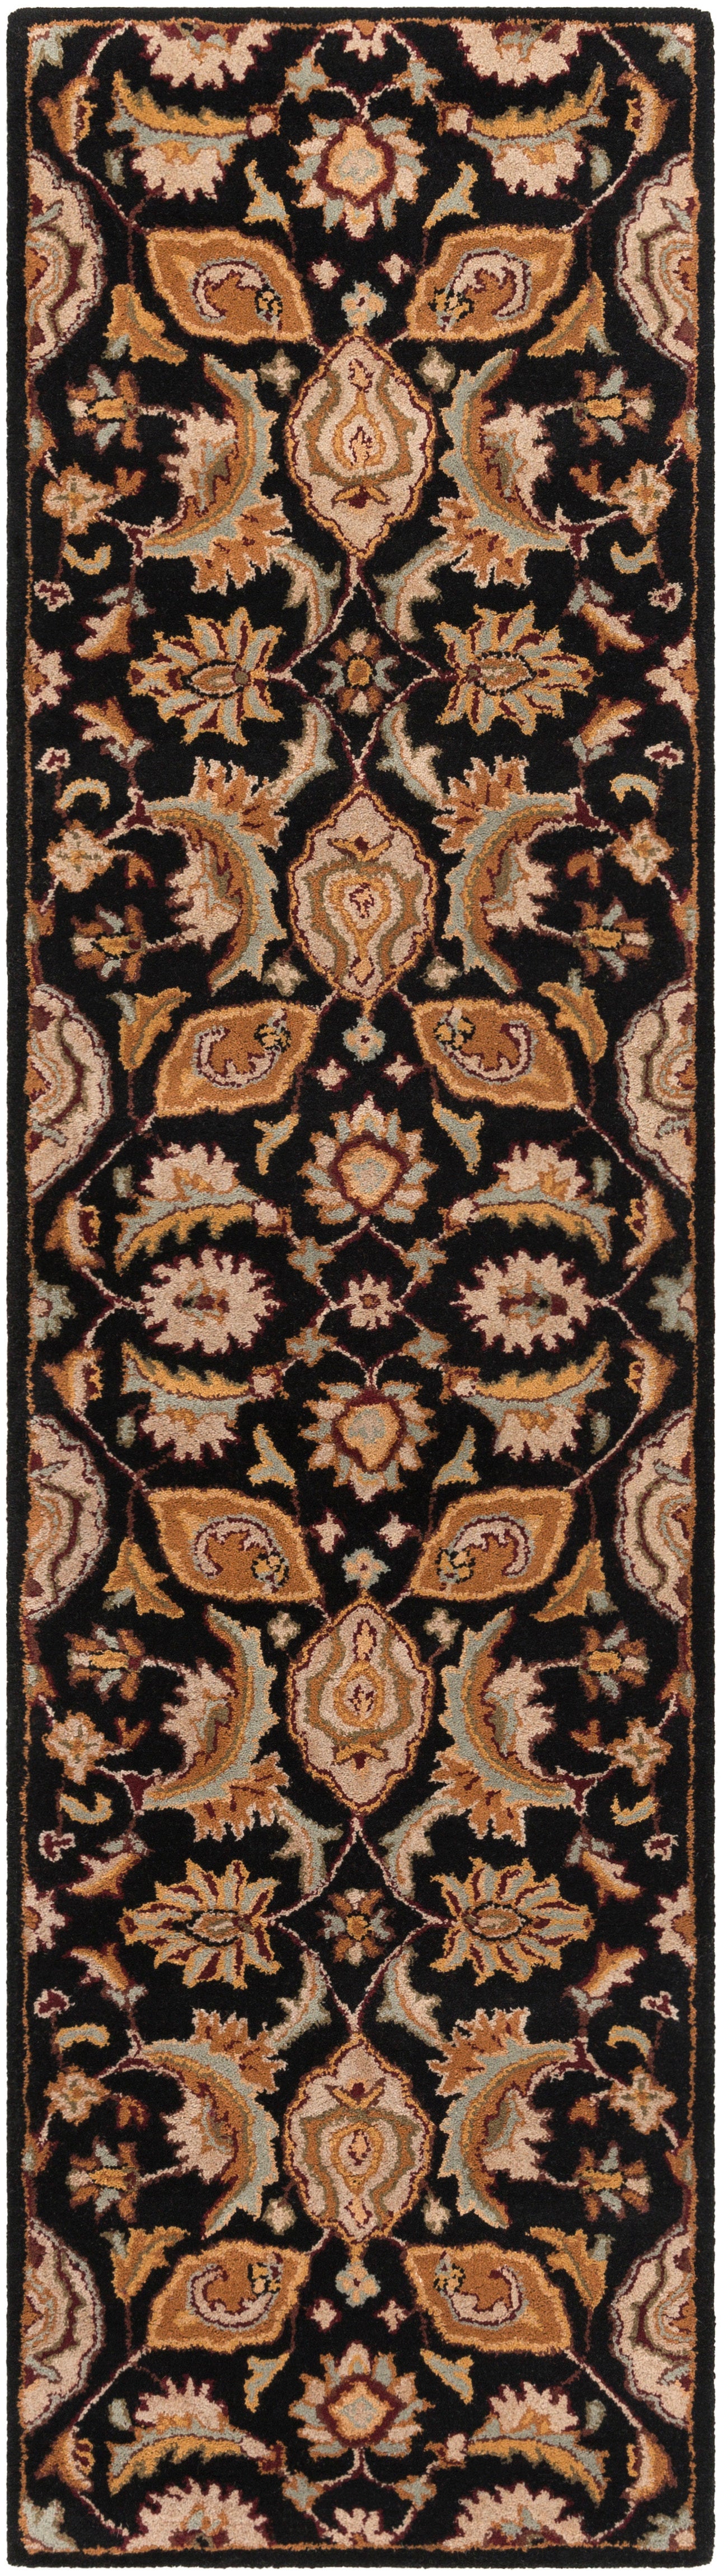 Middleton 21109 Hand Tufted Wool Indoor Area Rug by Surya Rugs